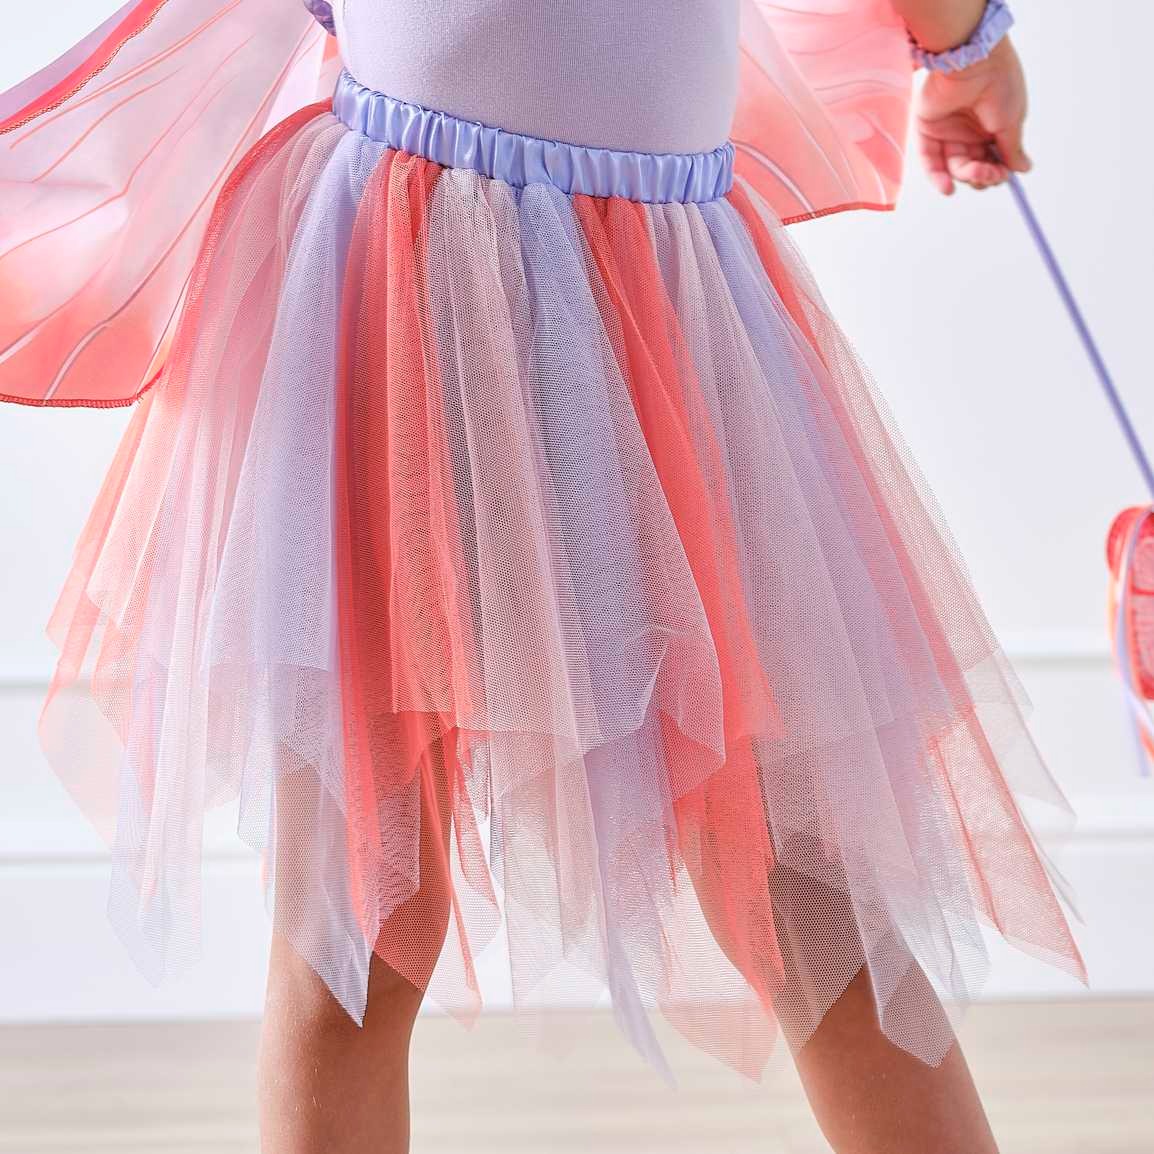 Tutu Butterfly 5-7 years